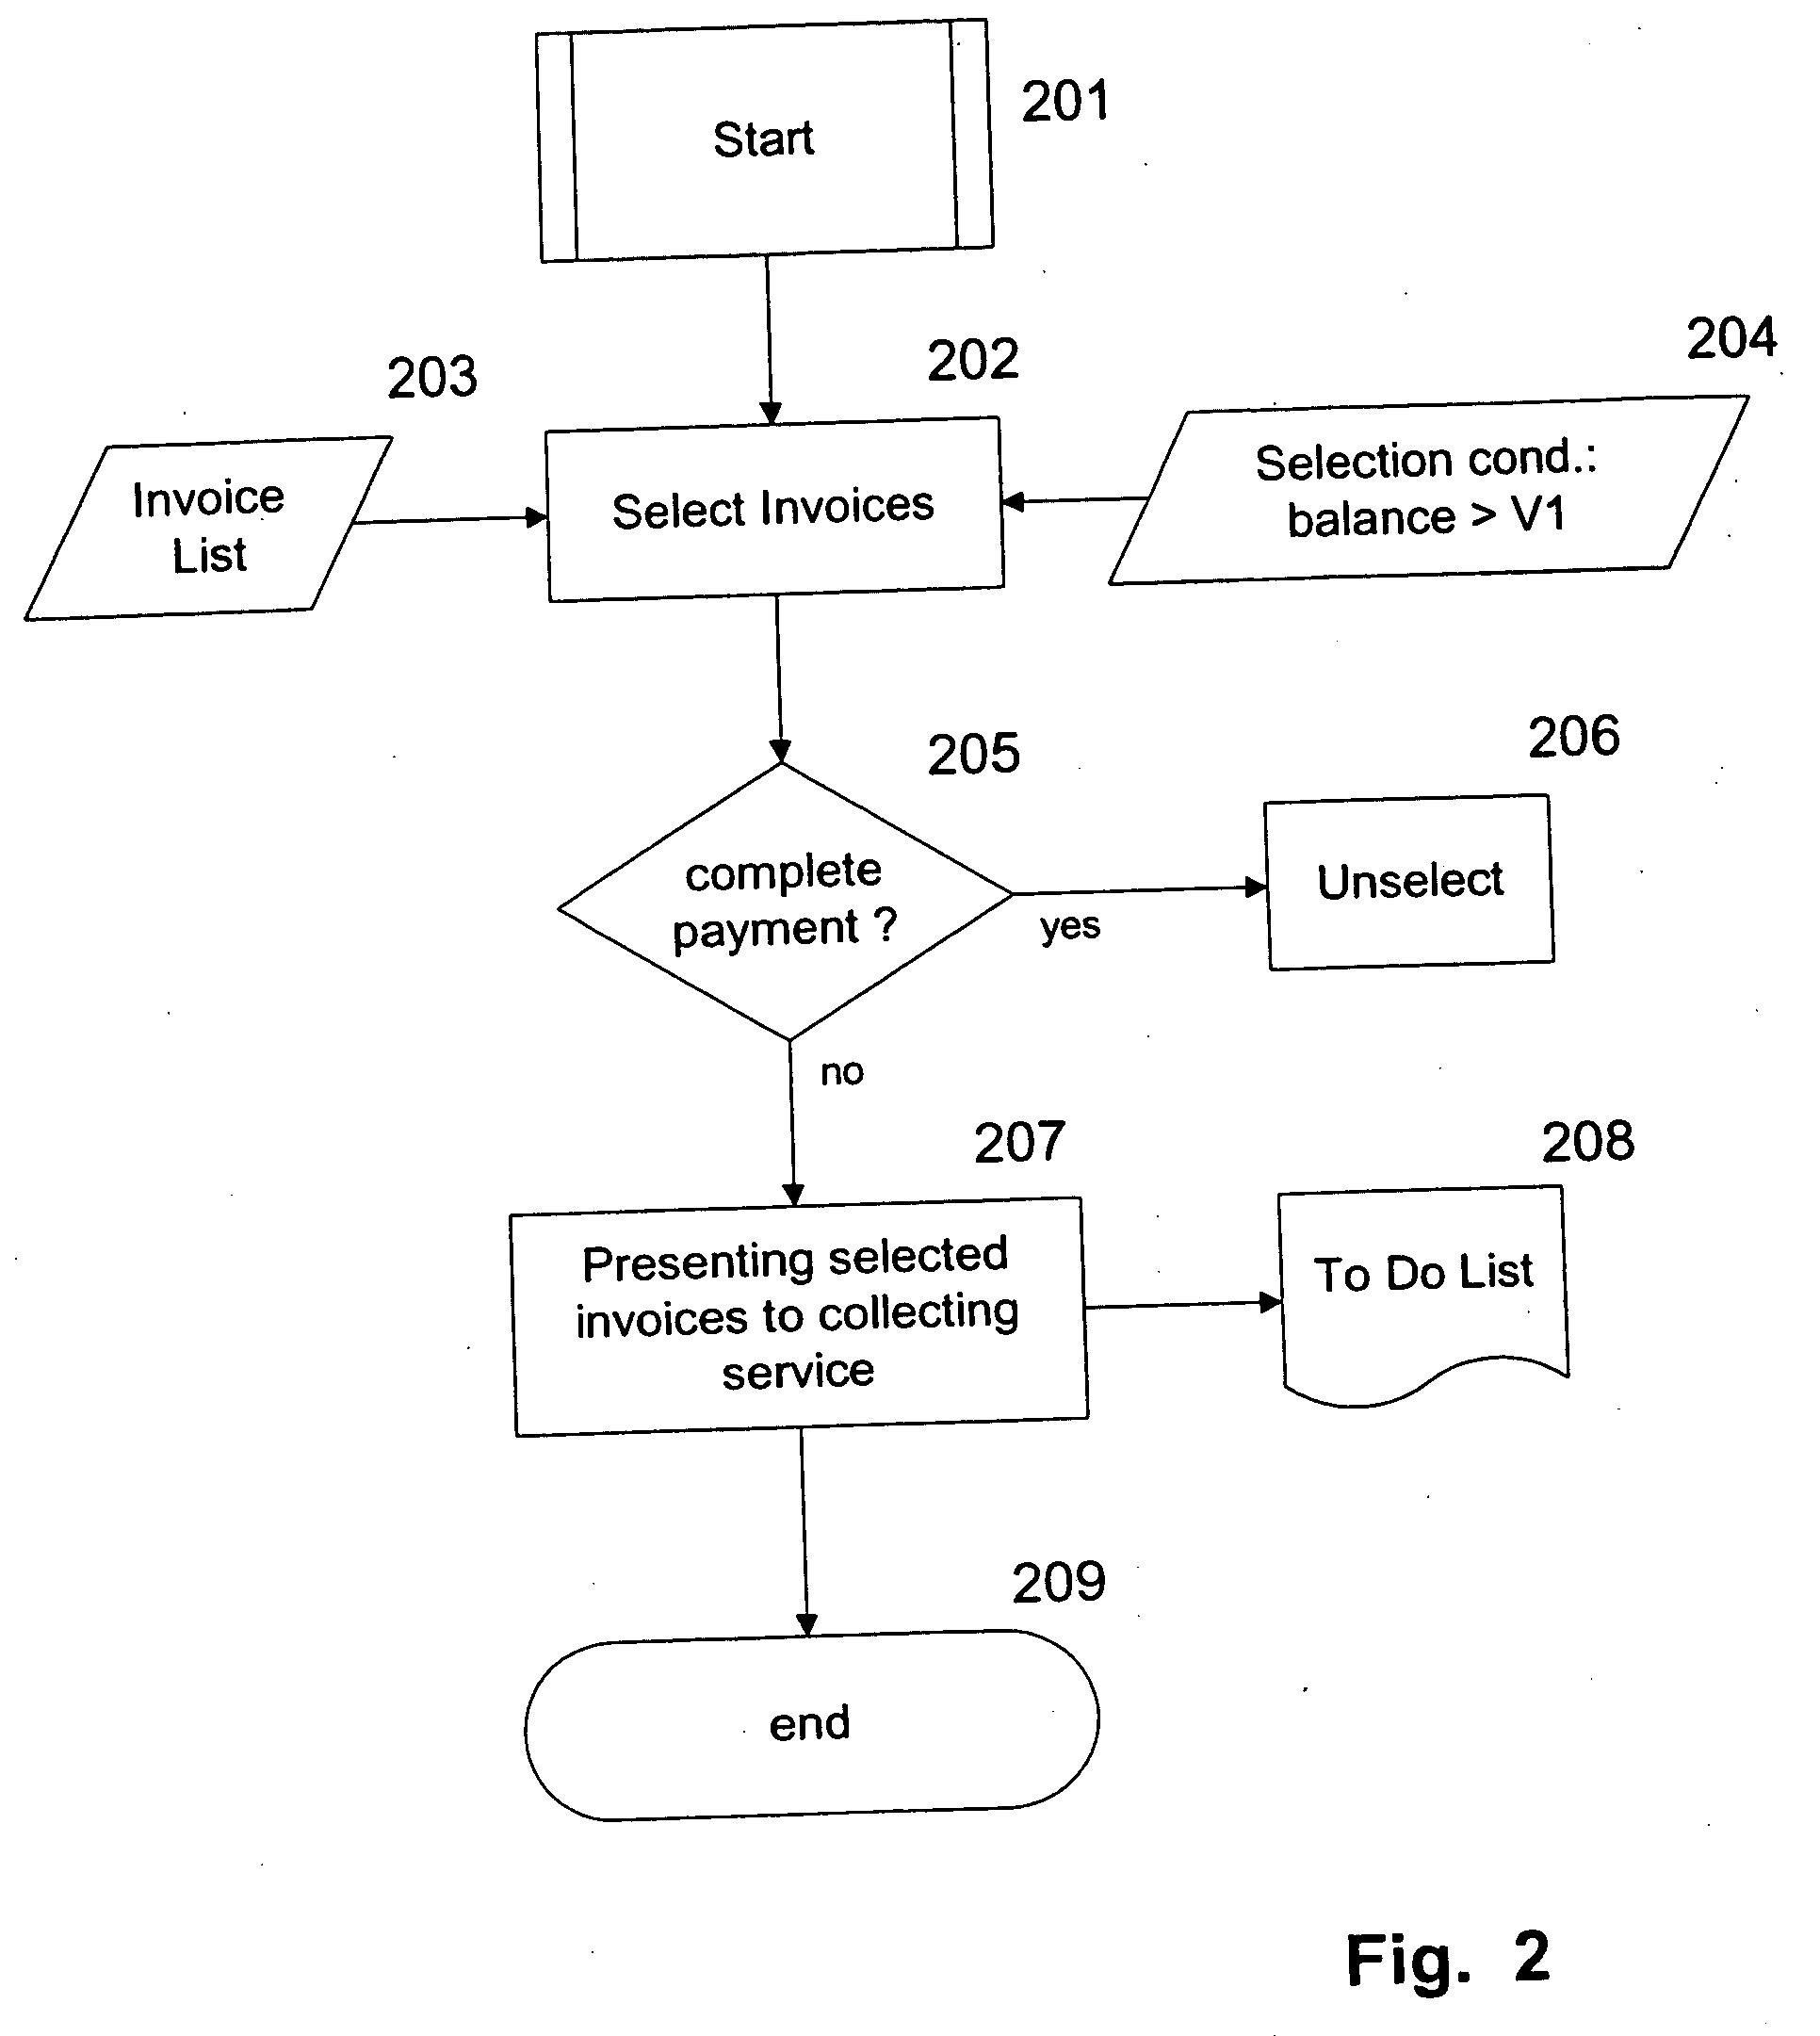 Method and software application for computer-aided cash collection